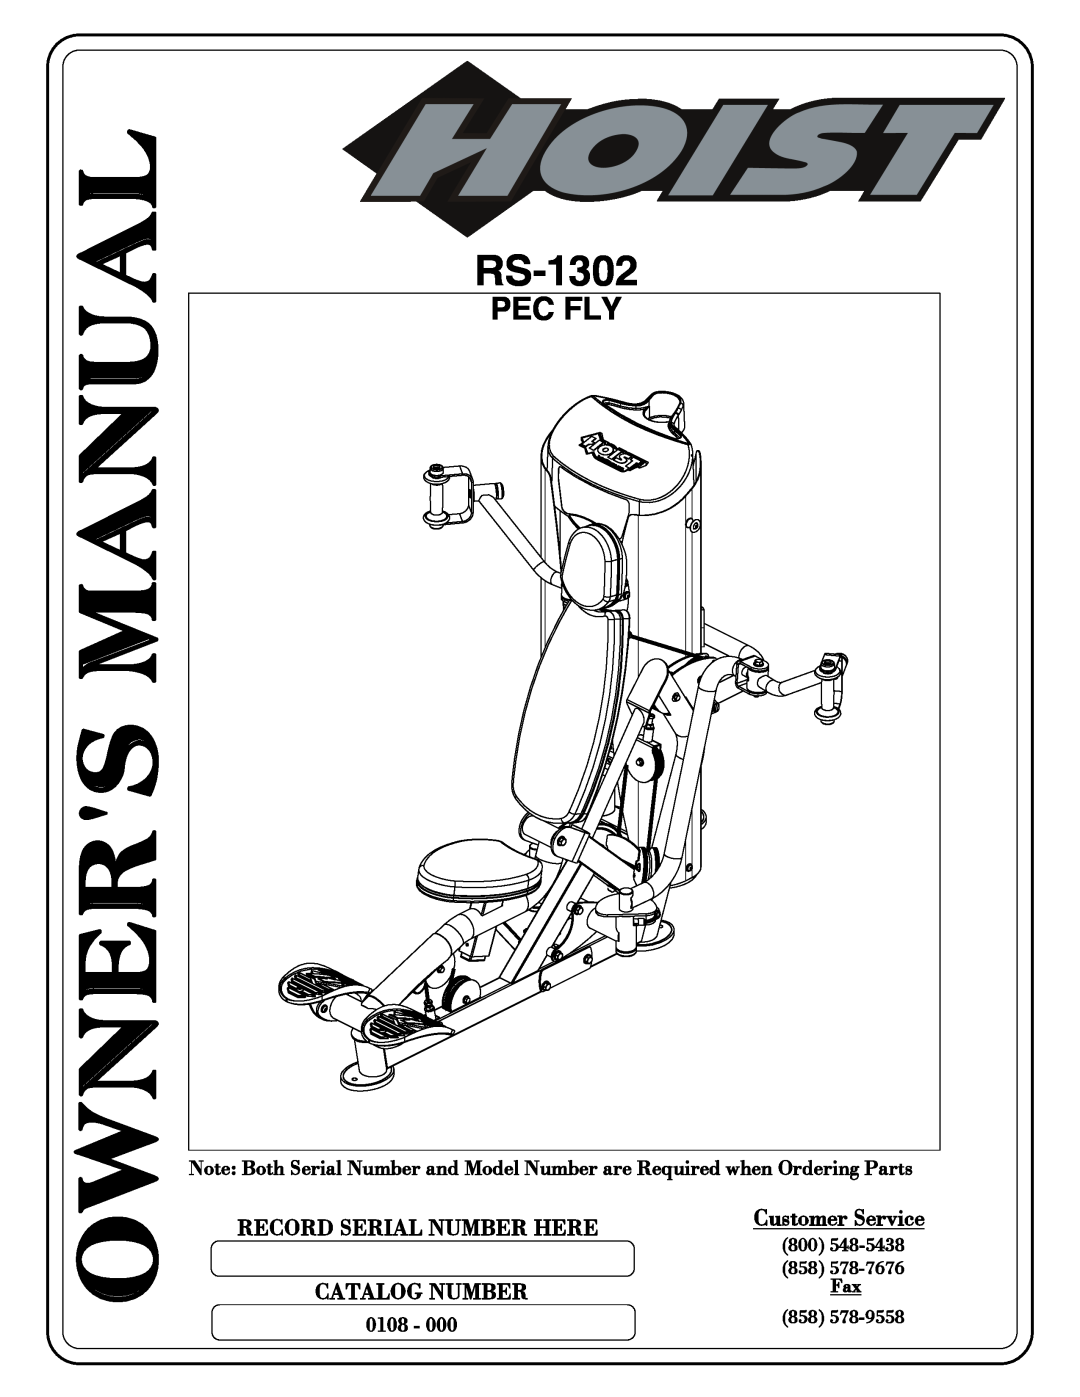 Hoist Fitness RS-1302 owner manual Pec Fly, Record Serial Number Here, Catalog Number, Customer Service, 0108 